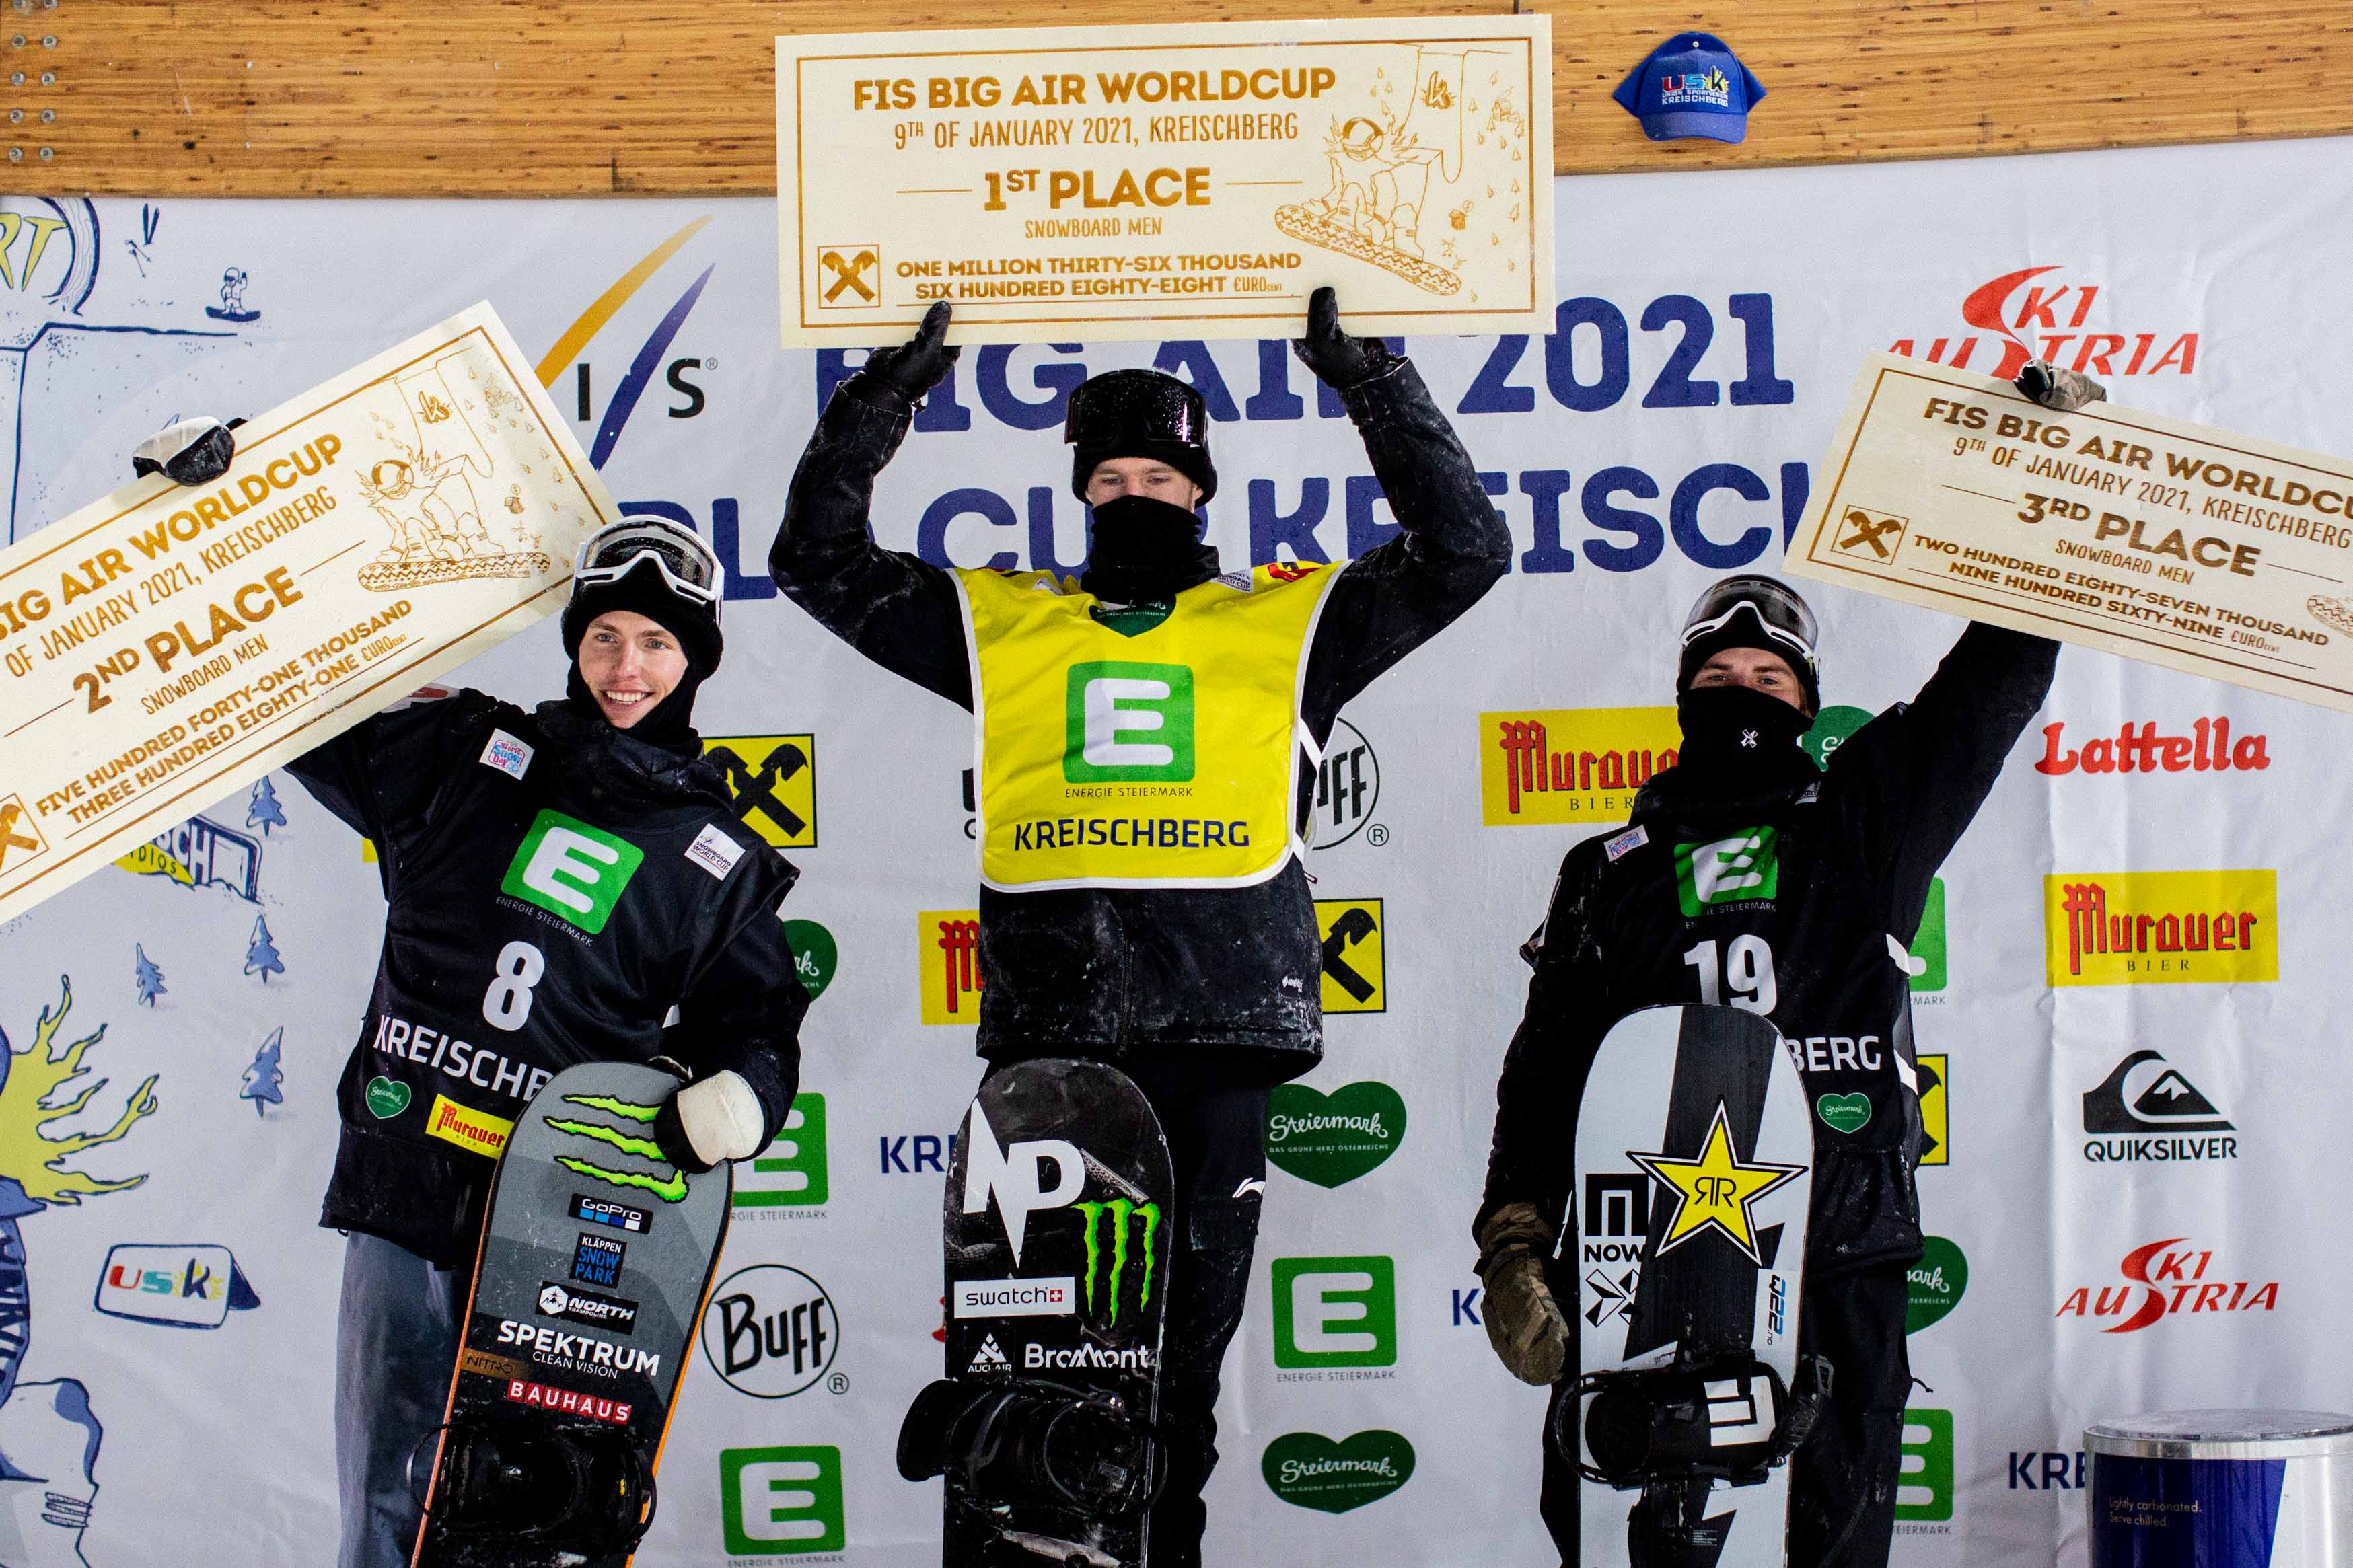 Monster Energy’s Max Parrot Takes Gold and Sven Thorgren Takes Silver in Snowboard Big Air at the FIS Snowboard Park & Pipe World Cup in Kreischberg, Austria